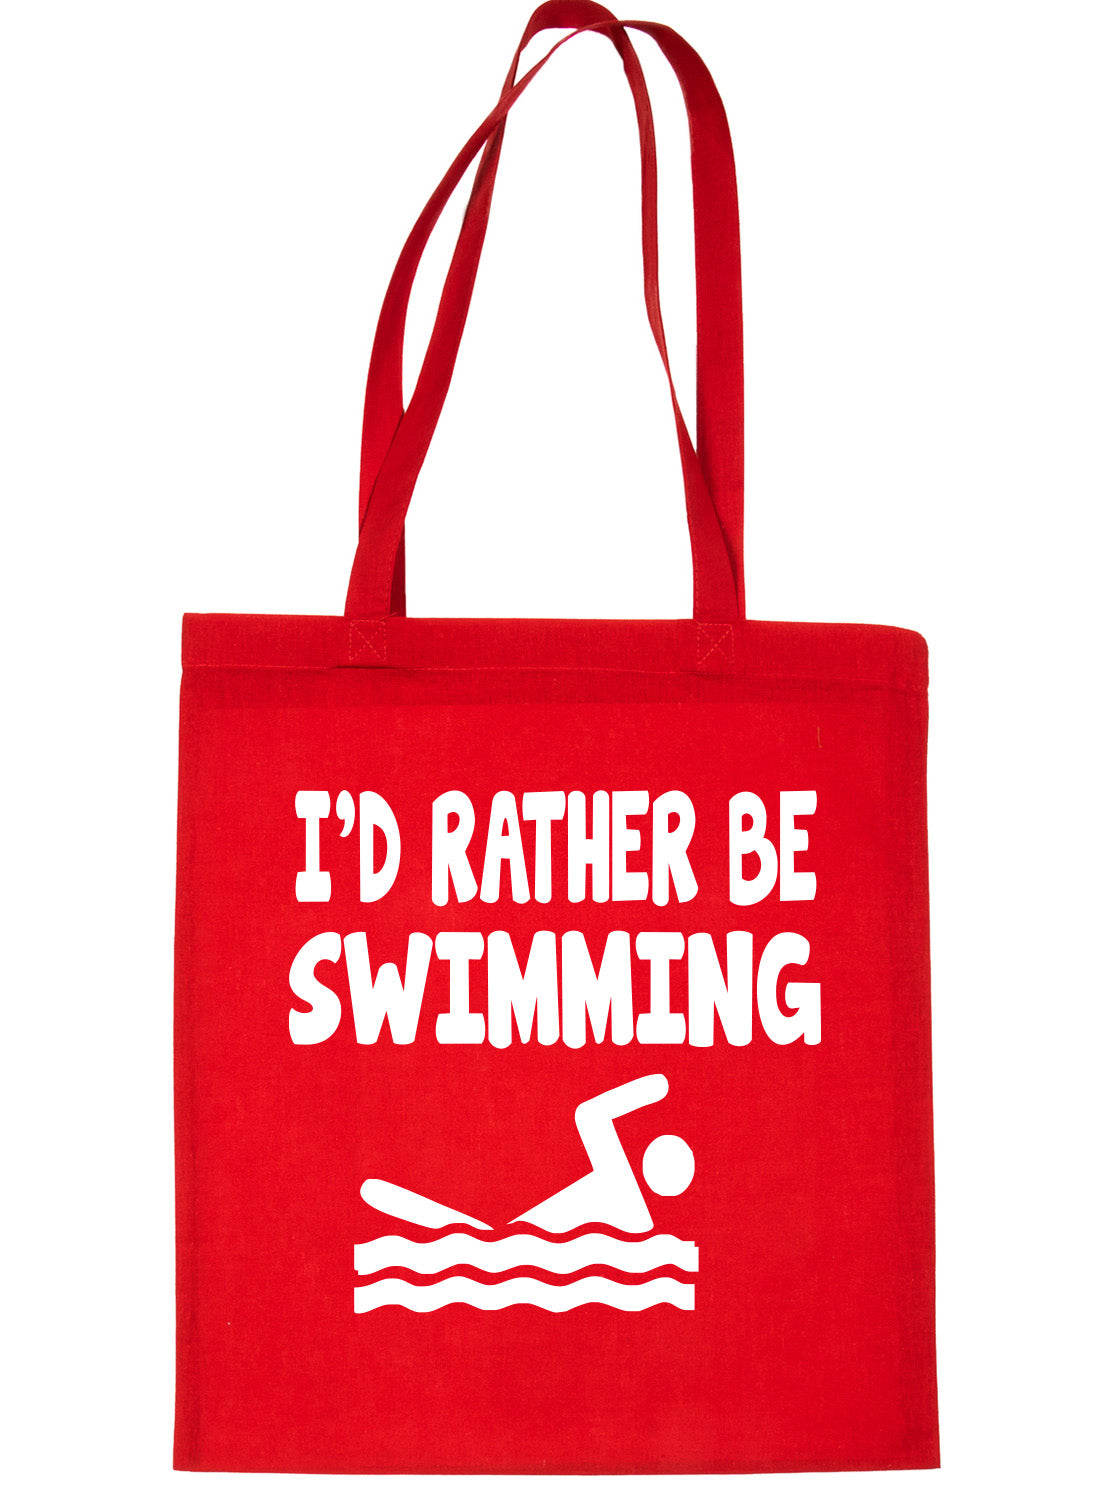 I'd Rather Be Swimming Swimmer Shopping Tote Bag Ladies Gift